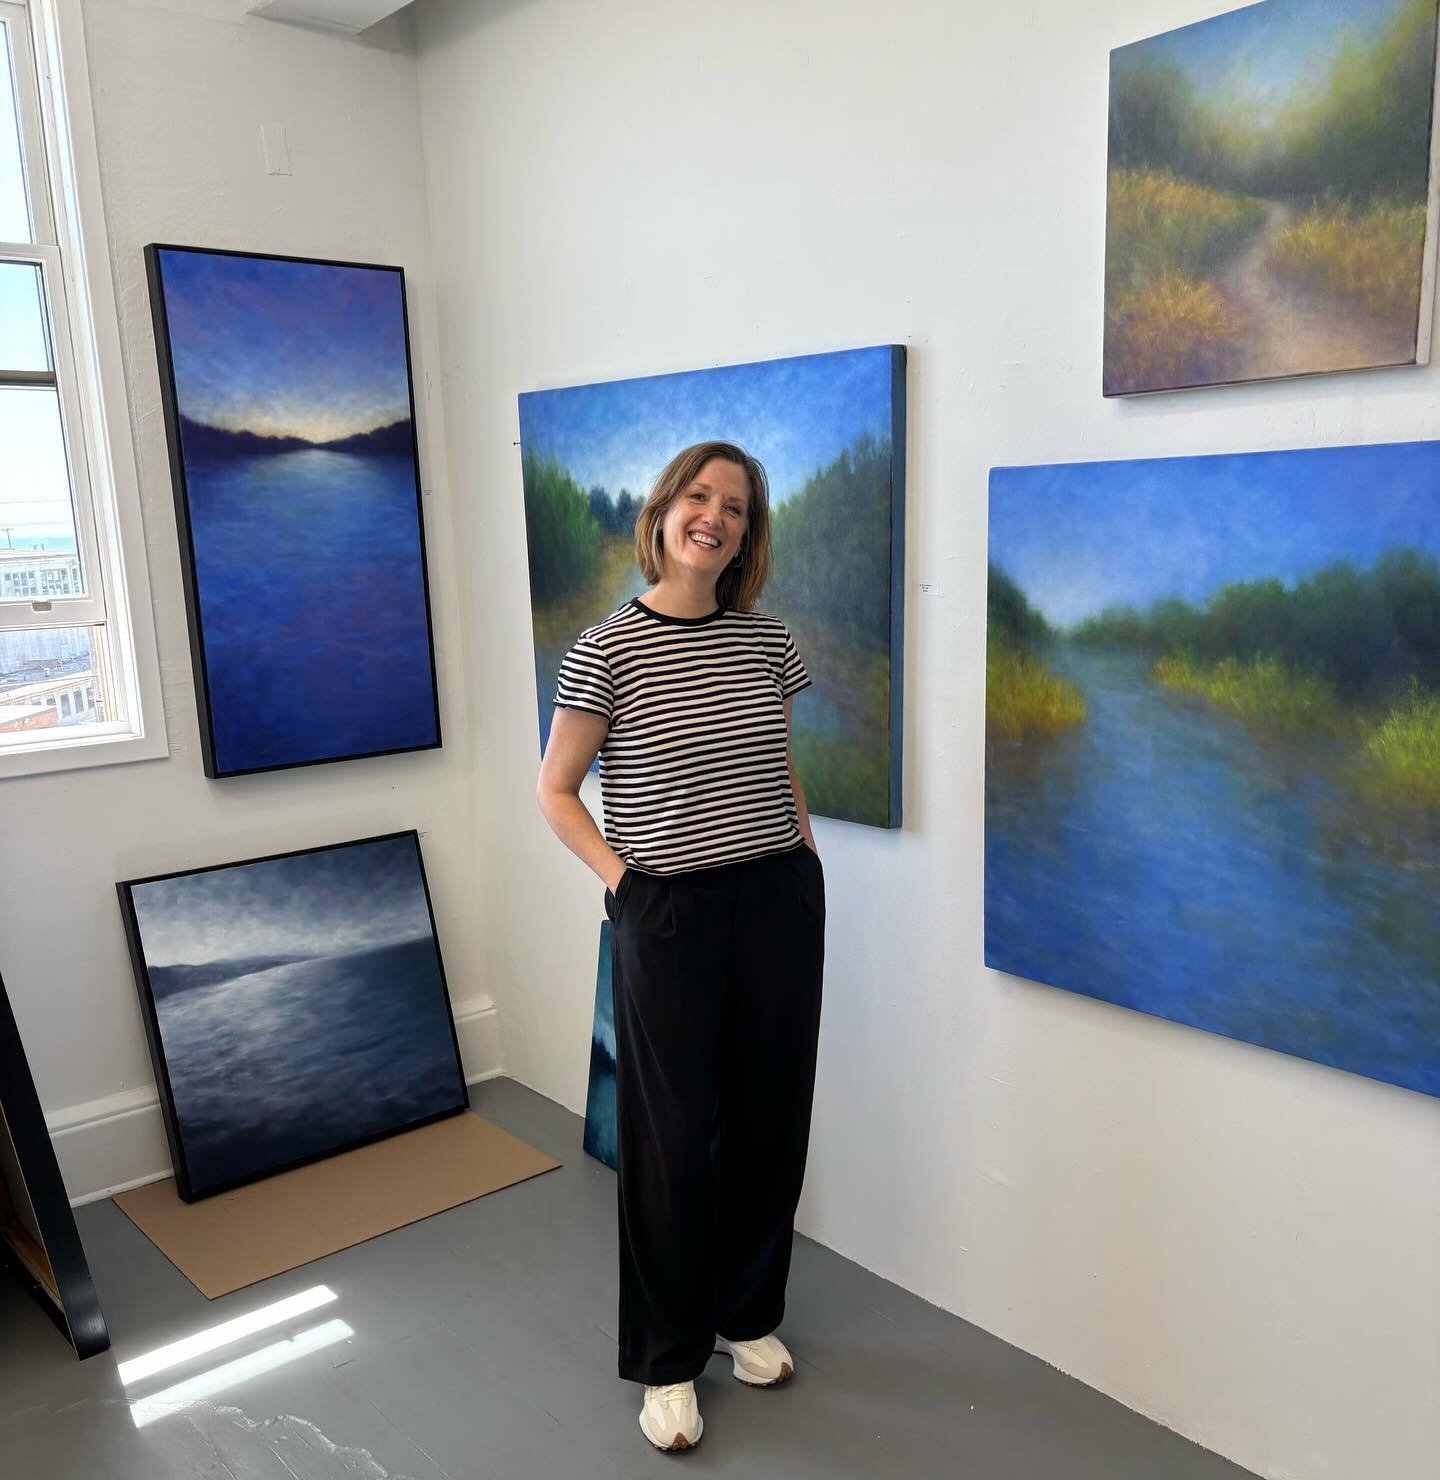 It&rsquo;s officially the first day of open studio at the shipyard! I hope to see you soon if. If you can&rsquo;t make it this weekend, you can always get in touch and schedule a time to come visit me in my studio and see my new work. Hunters Point S